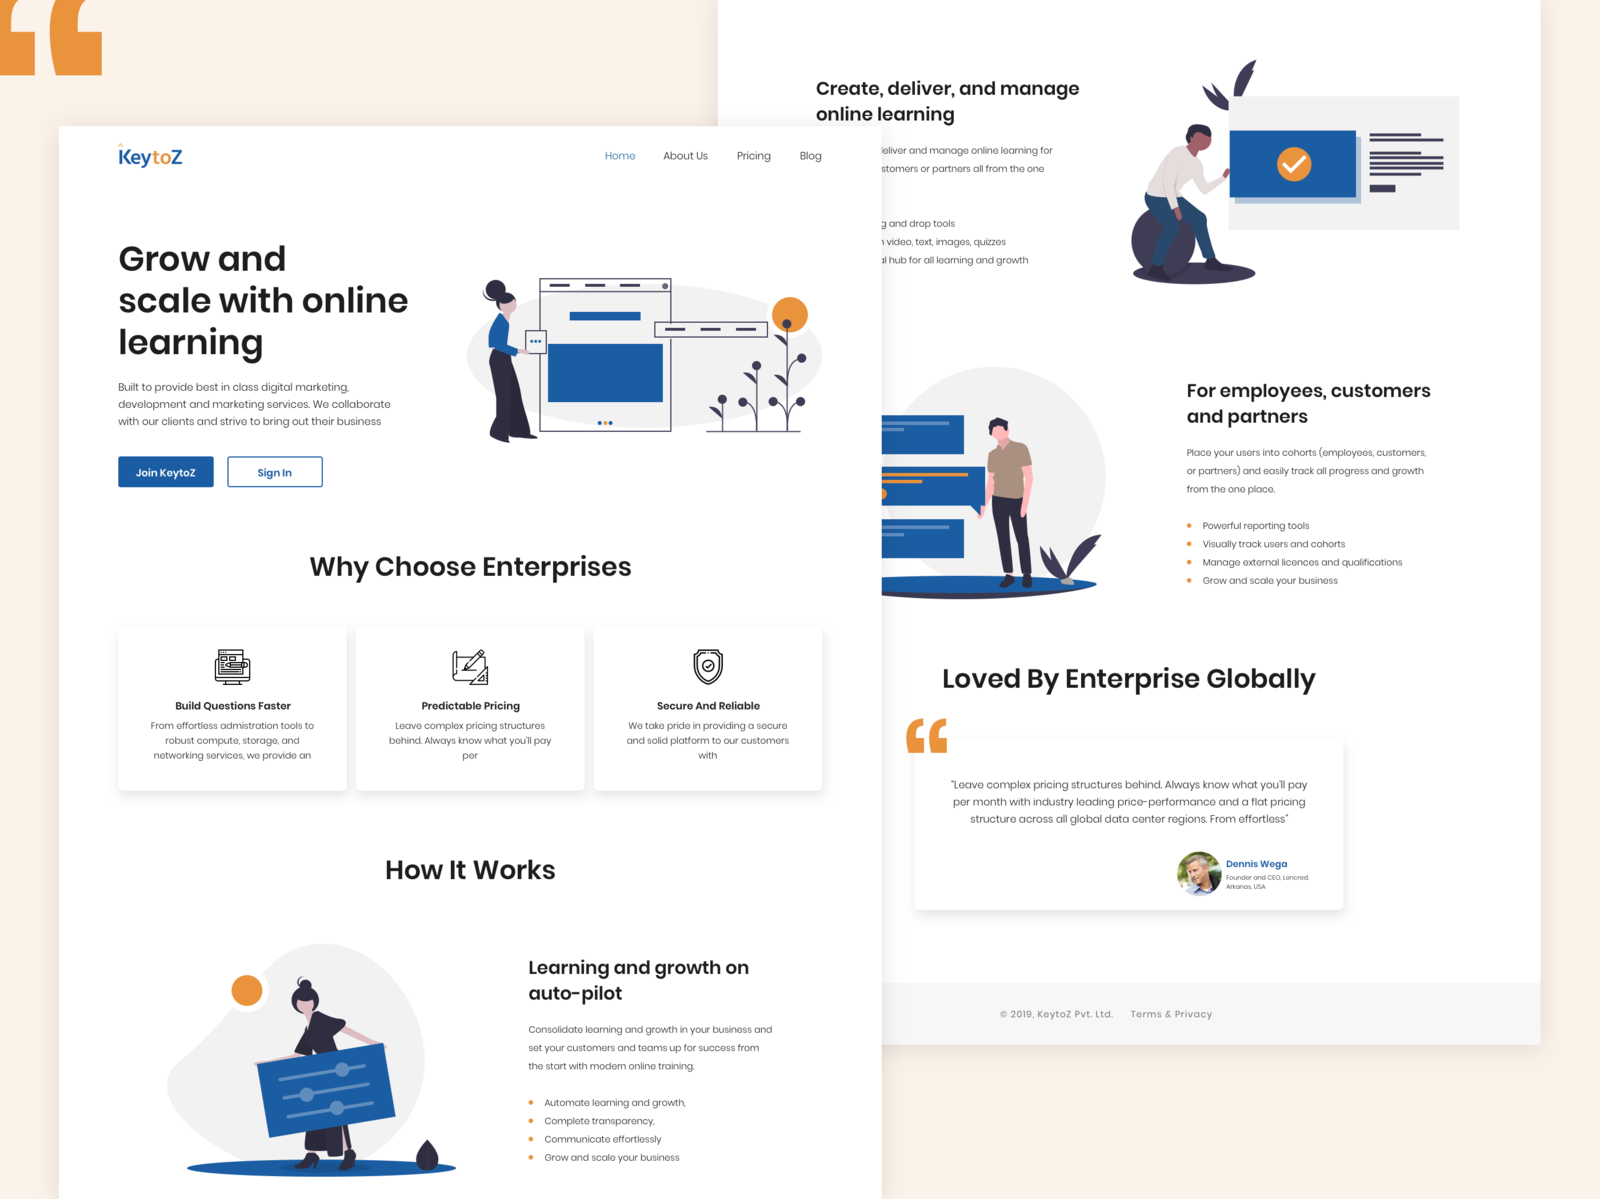 Landing Page For Keytoz By Shumroze Bhat On Dribbble